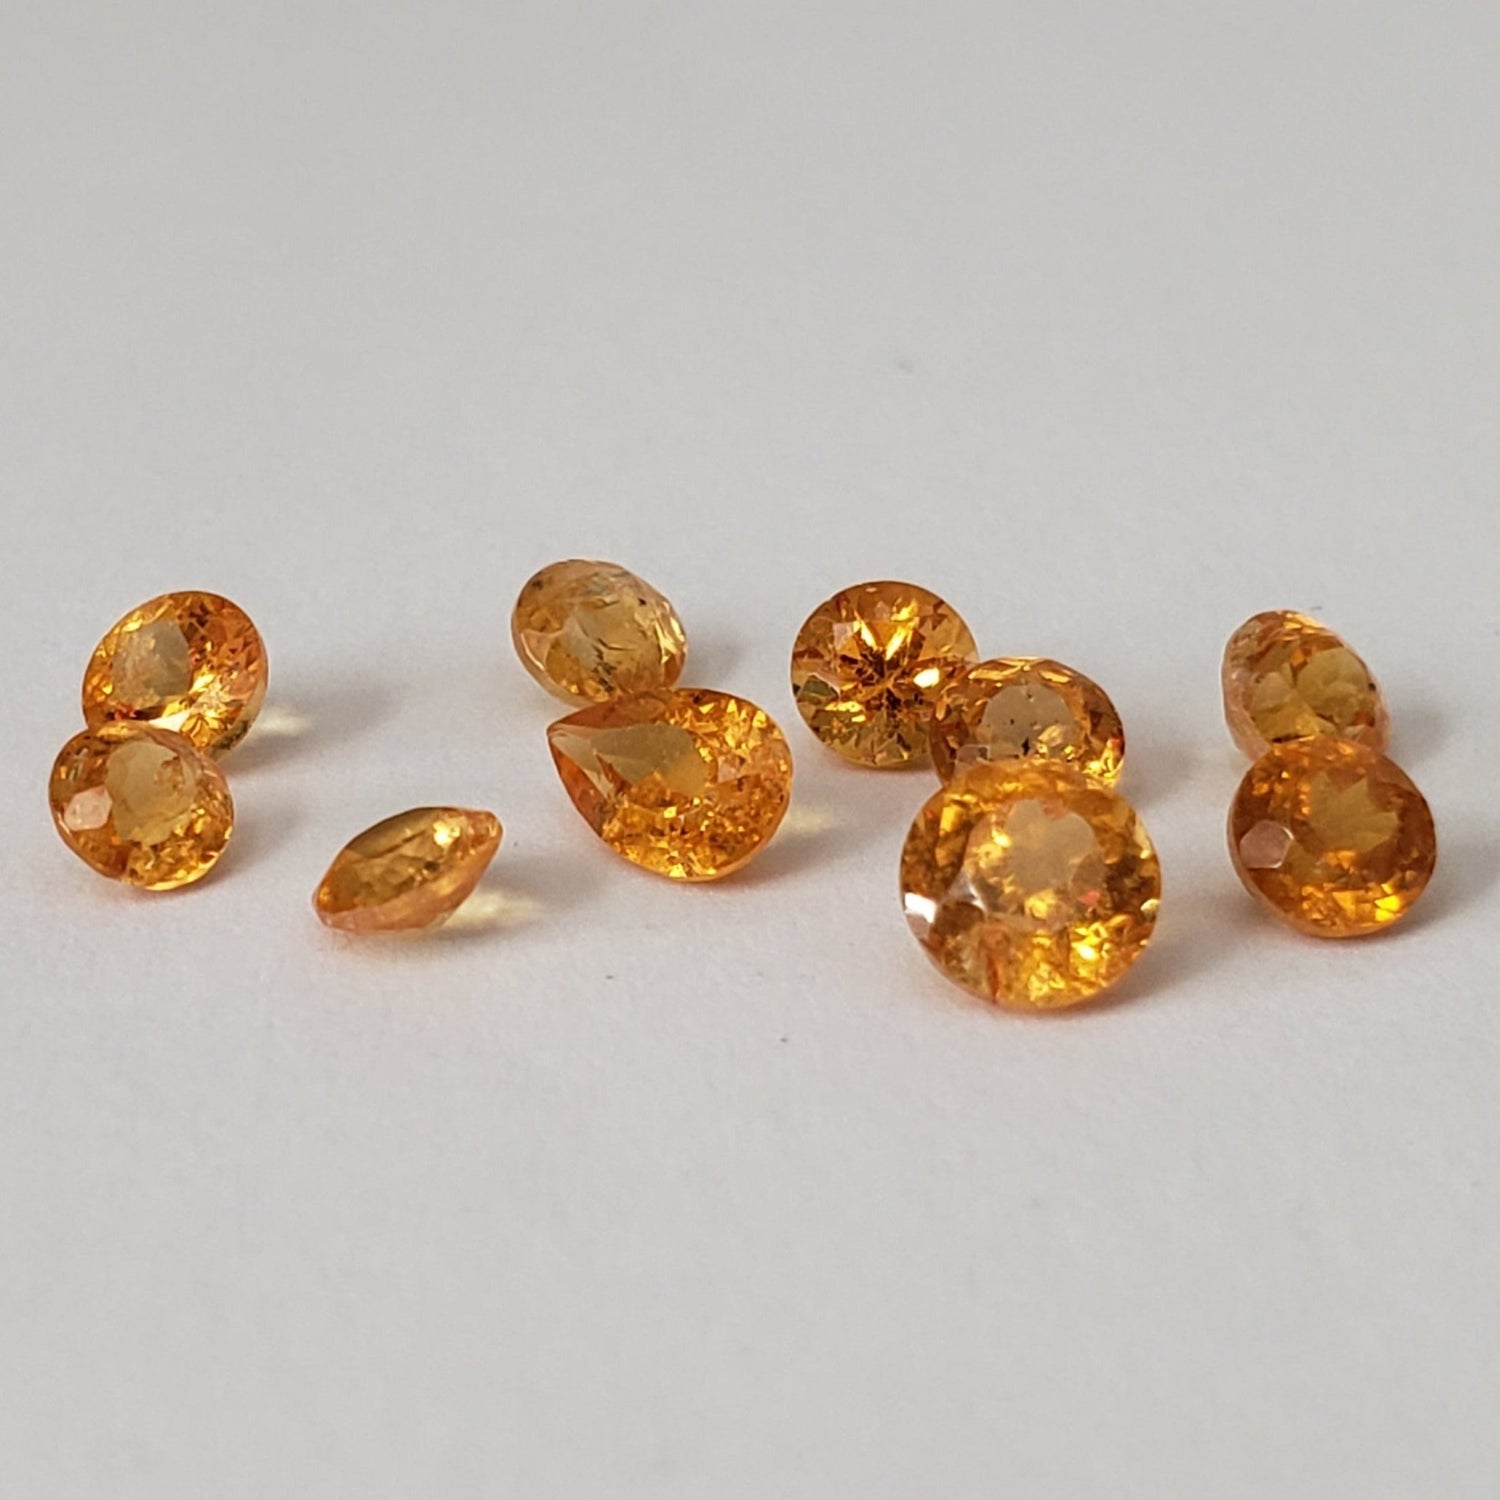 Spessartite Garnet | 10 piece Lot | Mixed Shapes and sizes | 4.4tcw